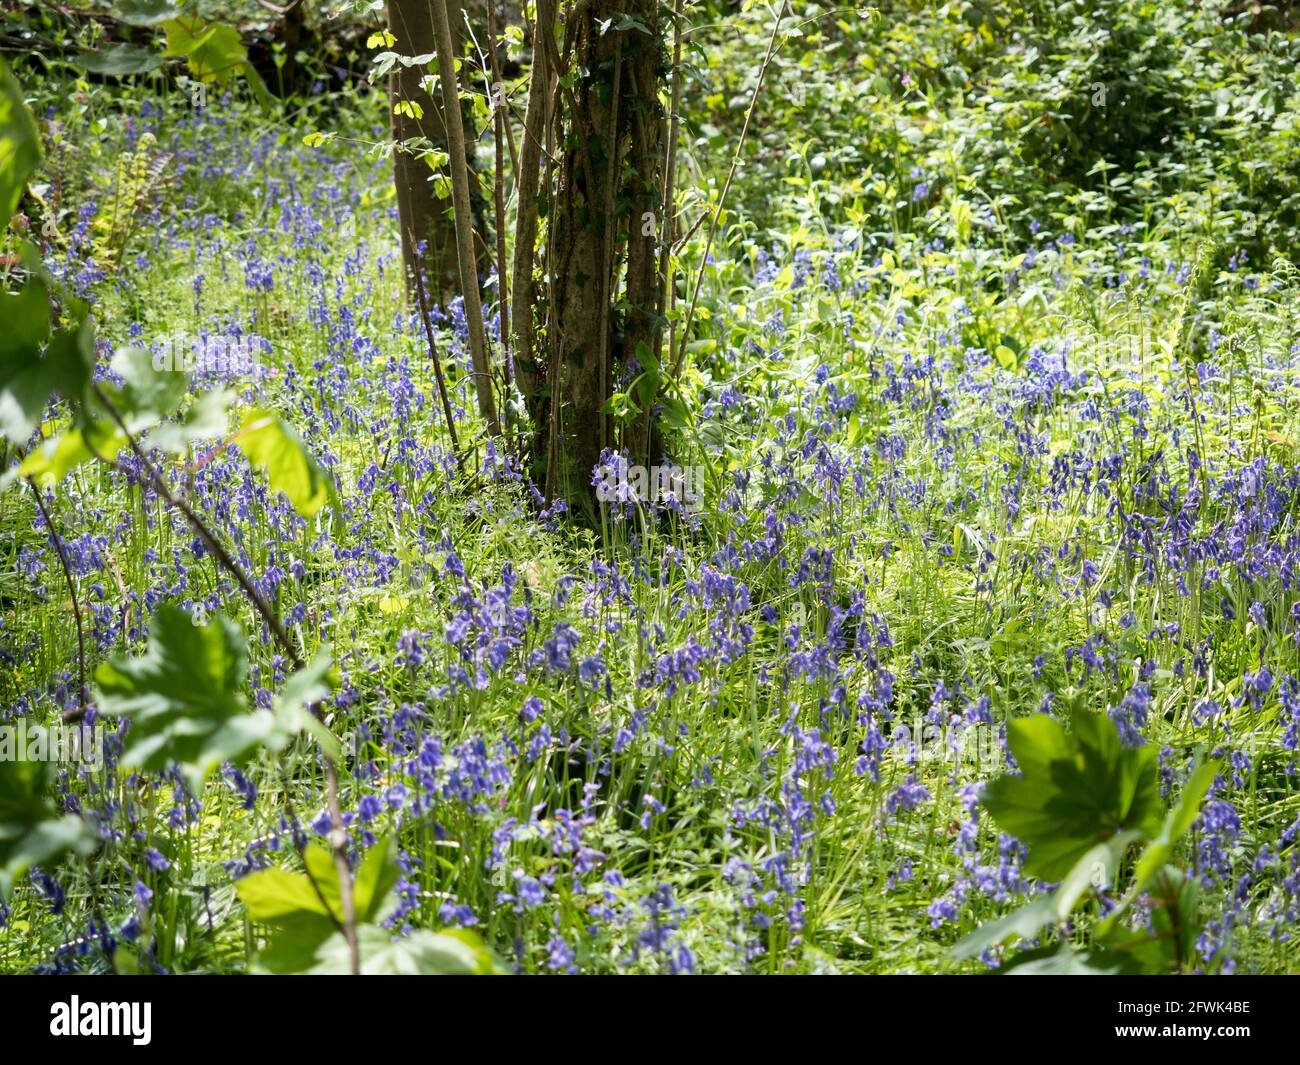 a view of English mauve purple violet Bluebells contrasting with green at foot of tree with dappled sunlight through foreground branches and leaves Stock Photo